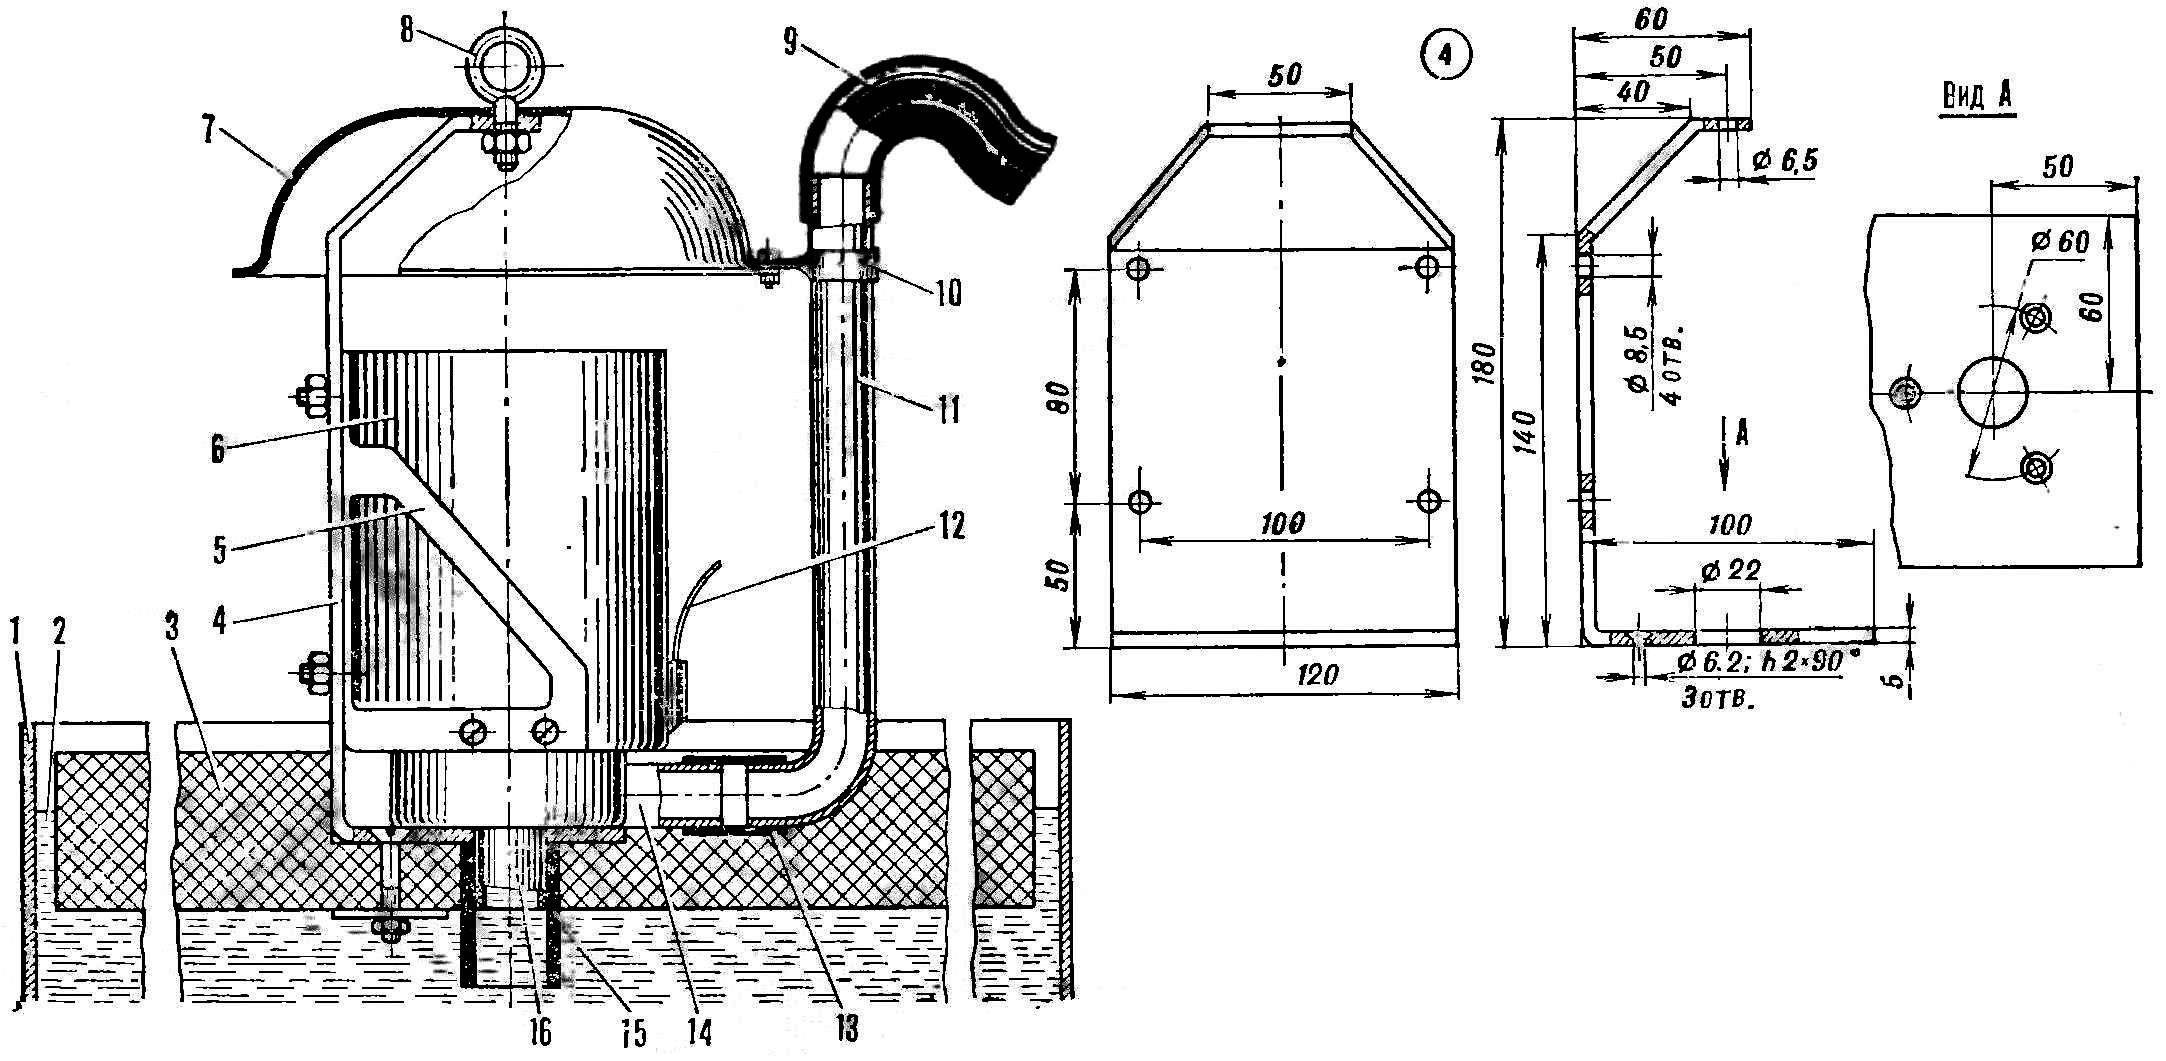 The device floating pump